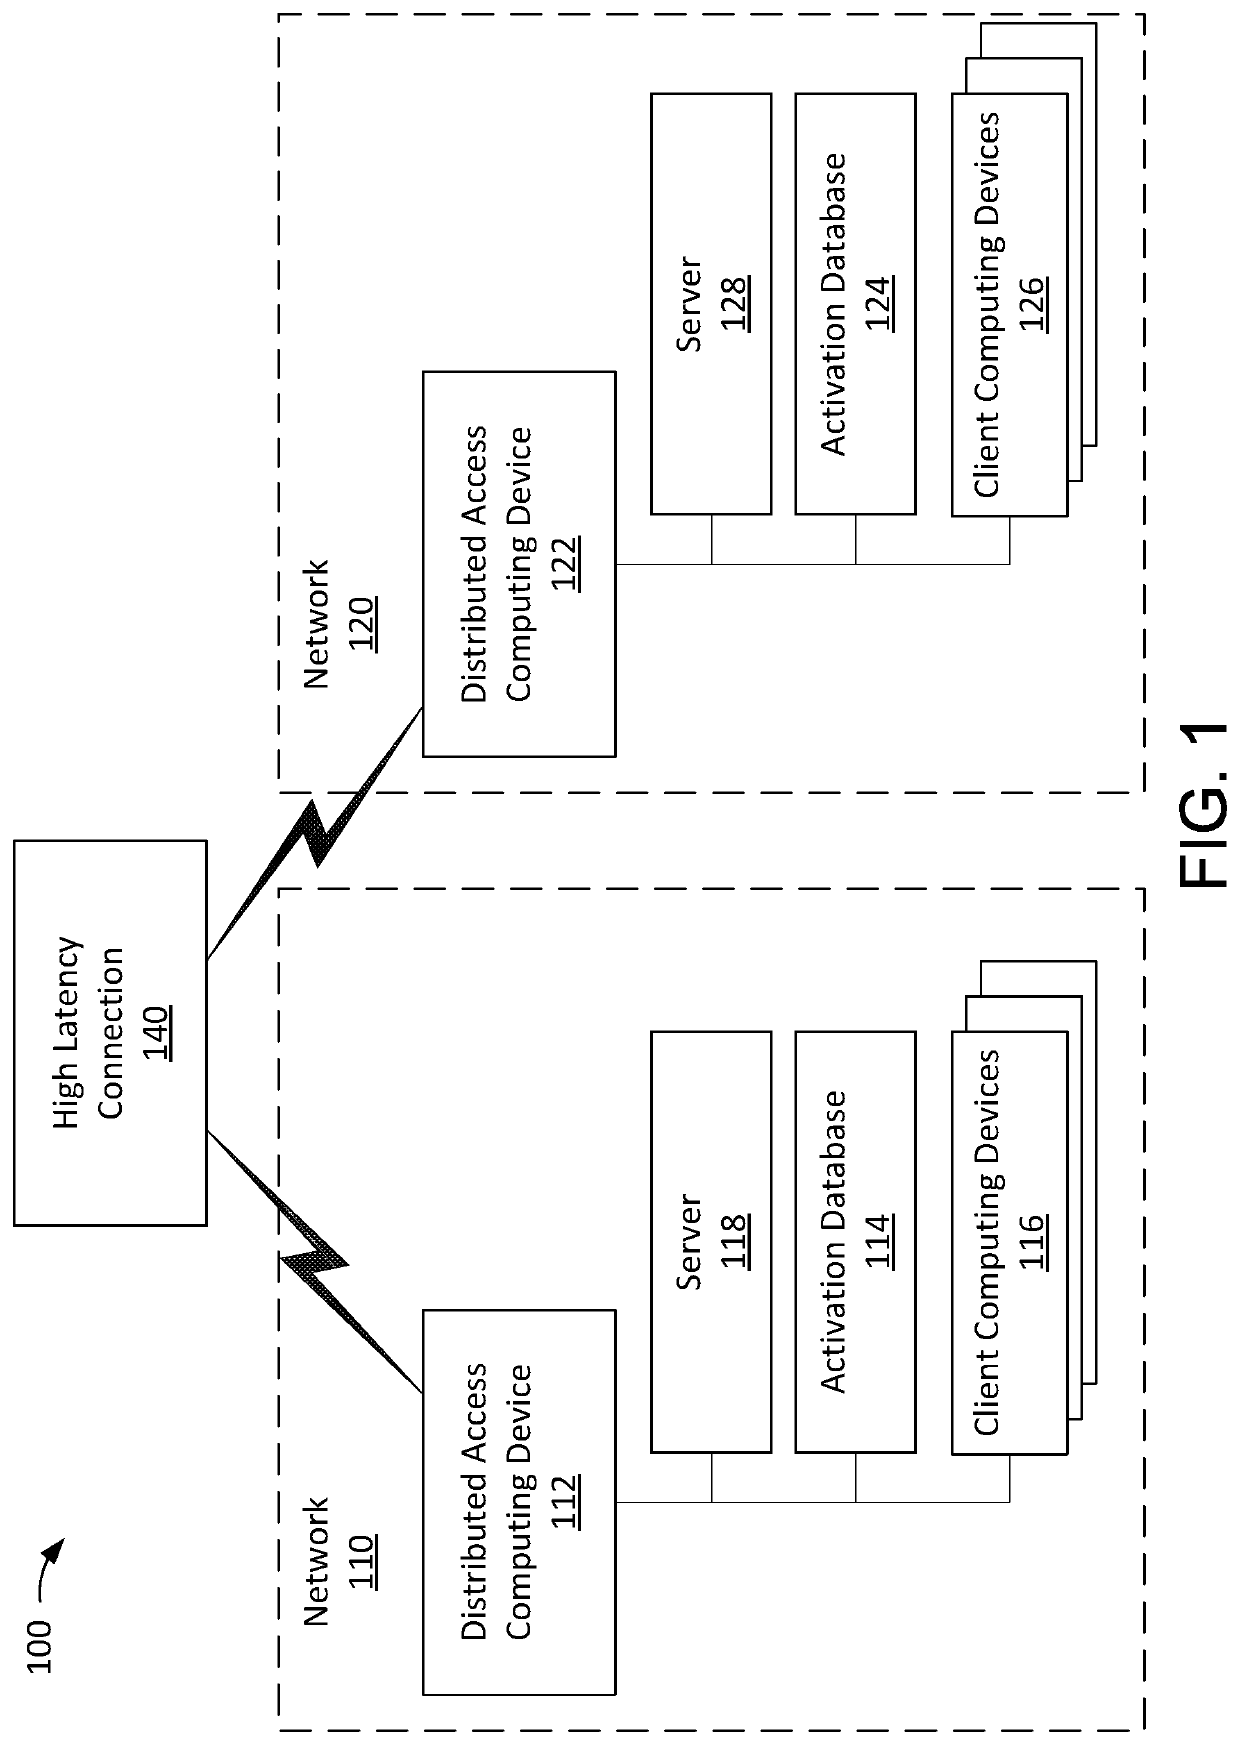 Controlling access to data resources on high latency networks